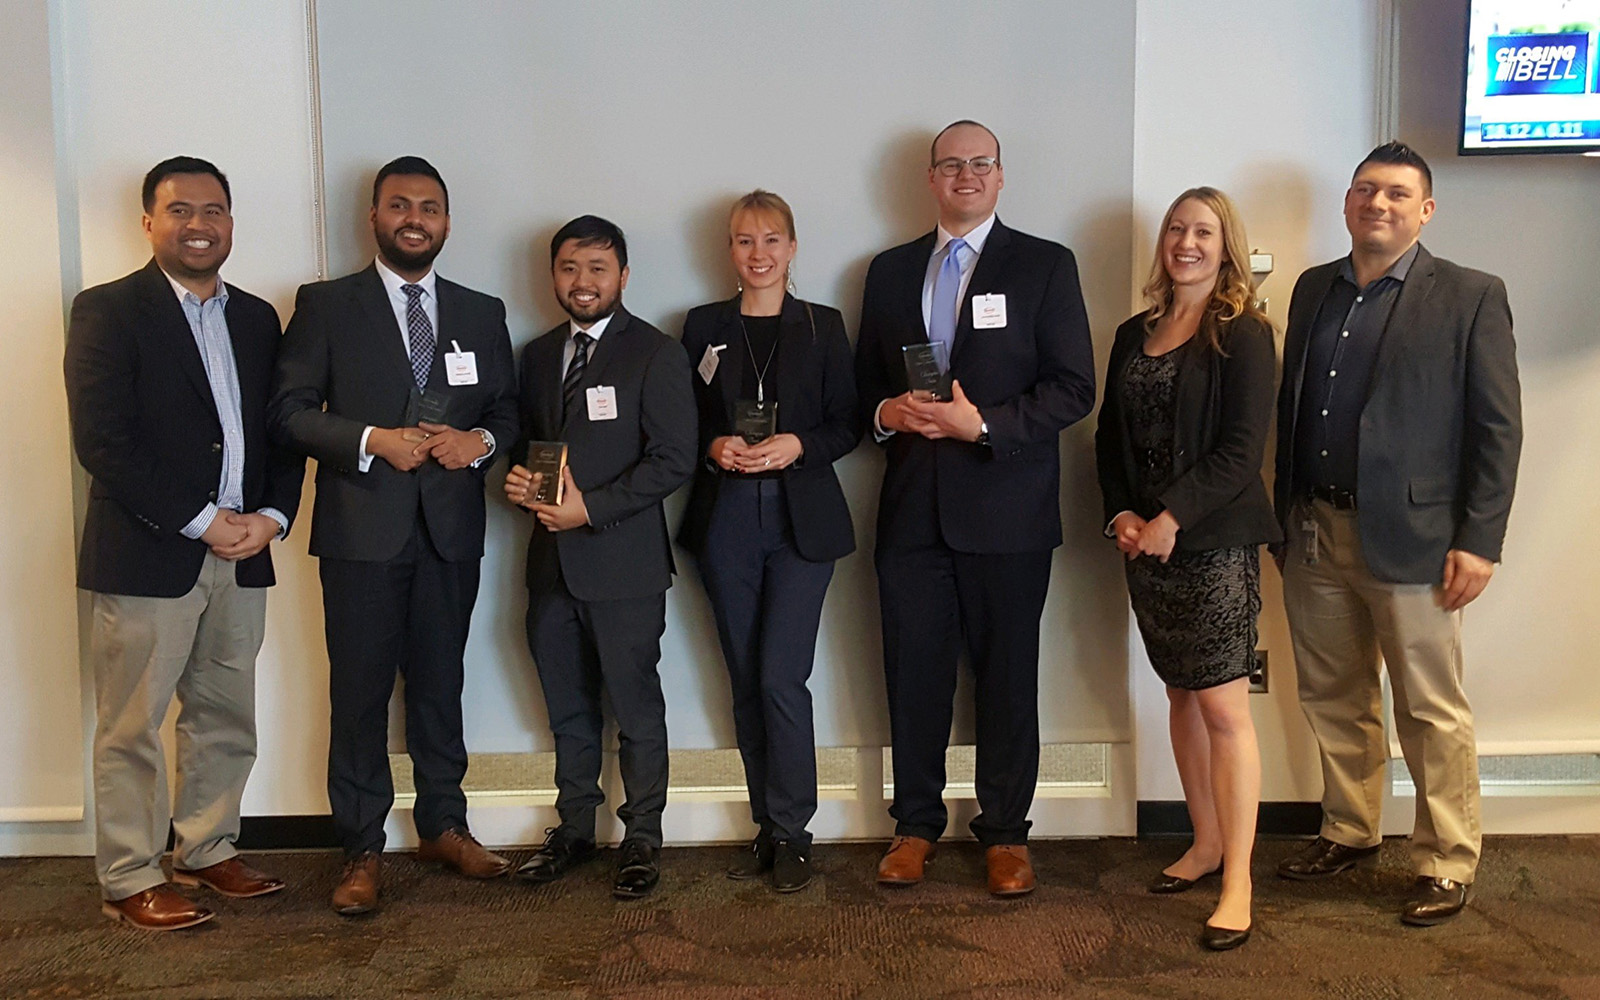 Kseniia Poiarkina ’18 MBA (center) poses for a photo with teammates and Henkel representatives following her team’s case competition win. (Kseniia Poiarkina '18 MBA/UConn School of Business)